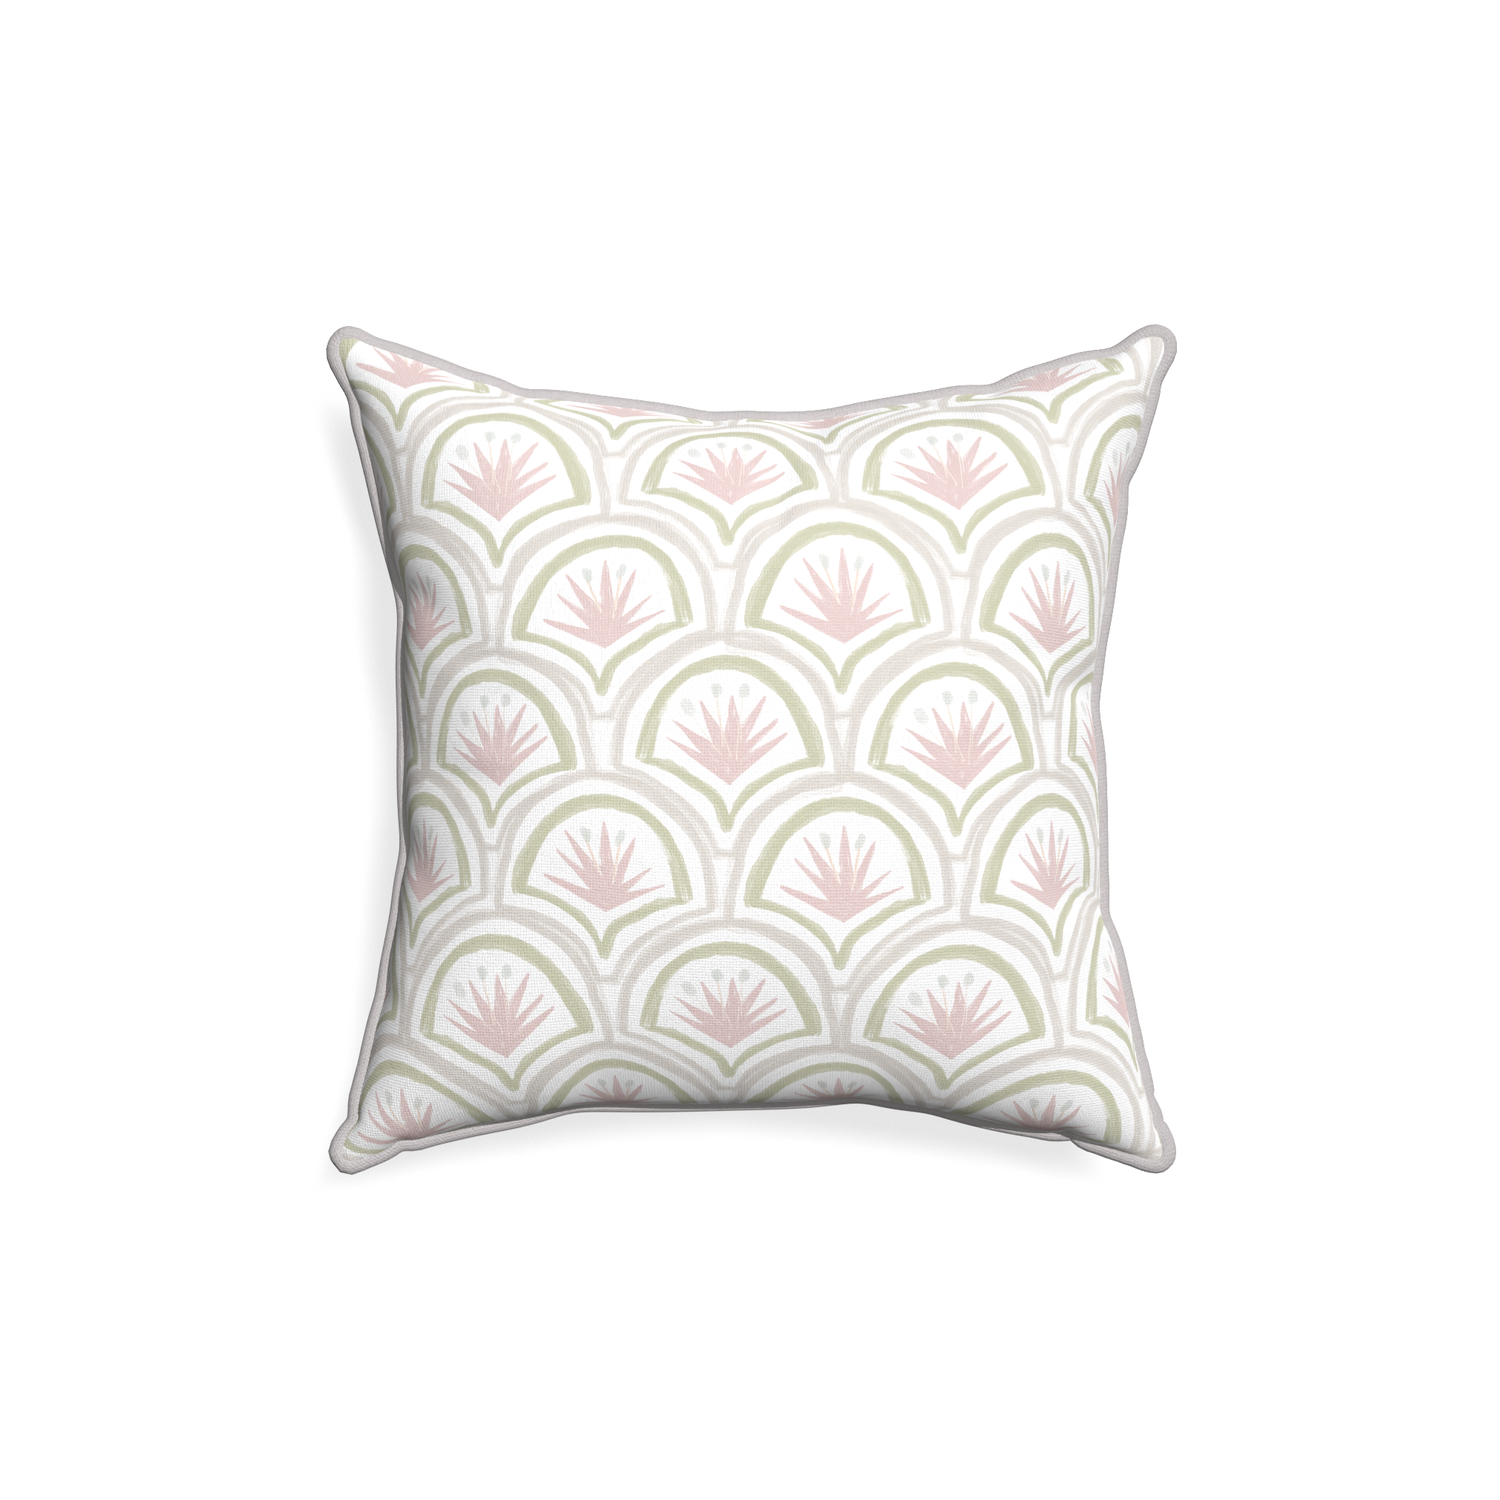 18-square thatcher rose custom pink & green palmpillow with pebble piping on white background